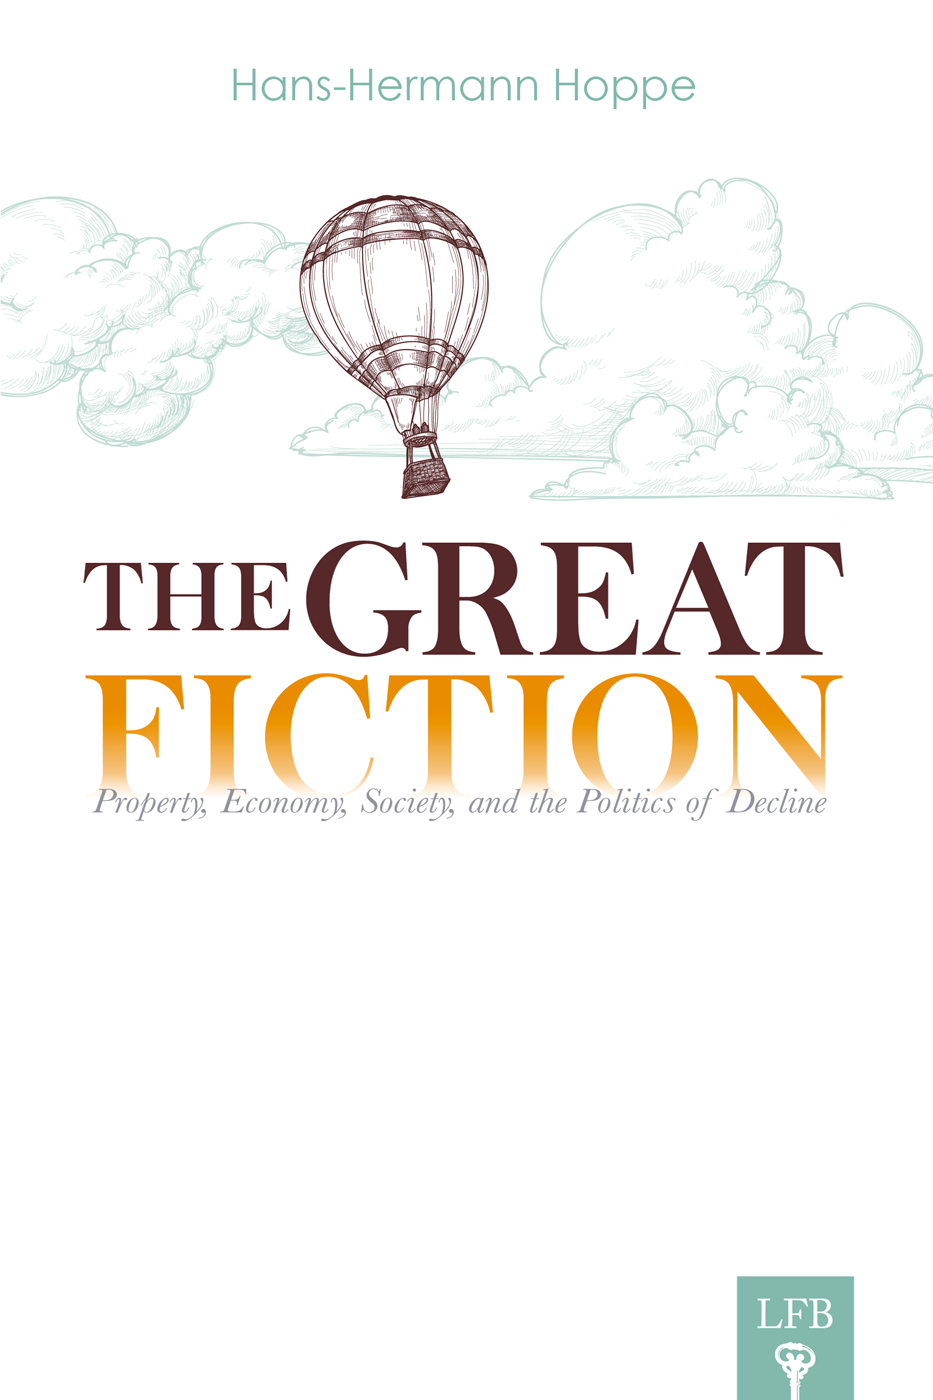 Hoppe, The Great Fiction-cover